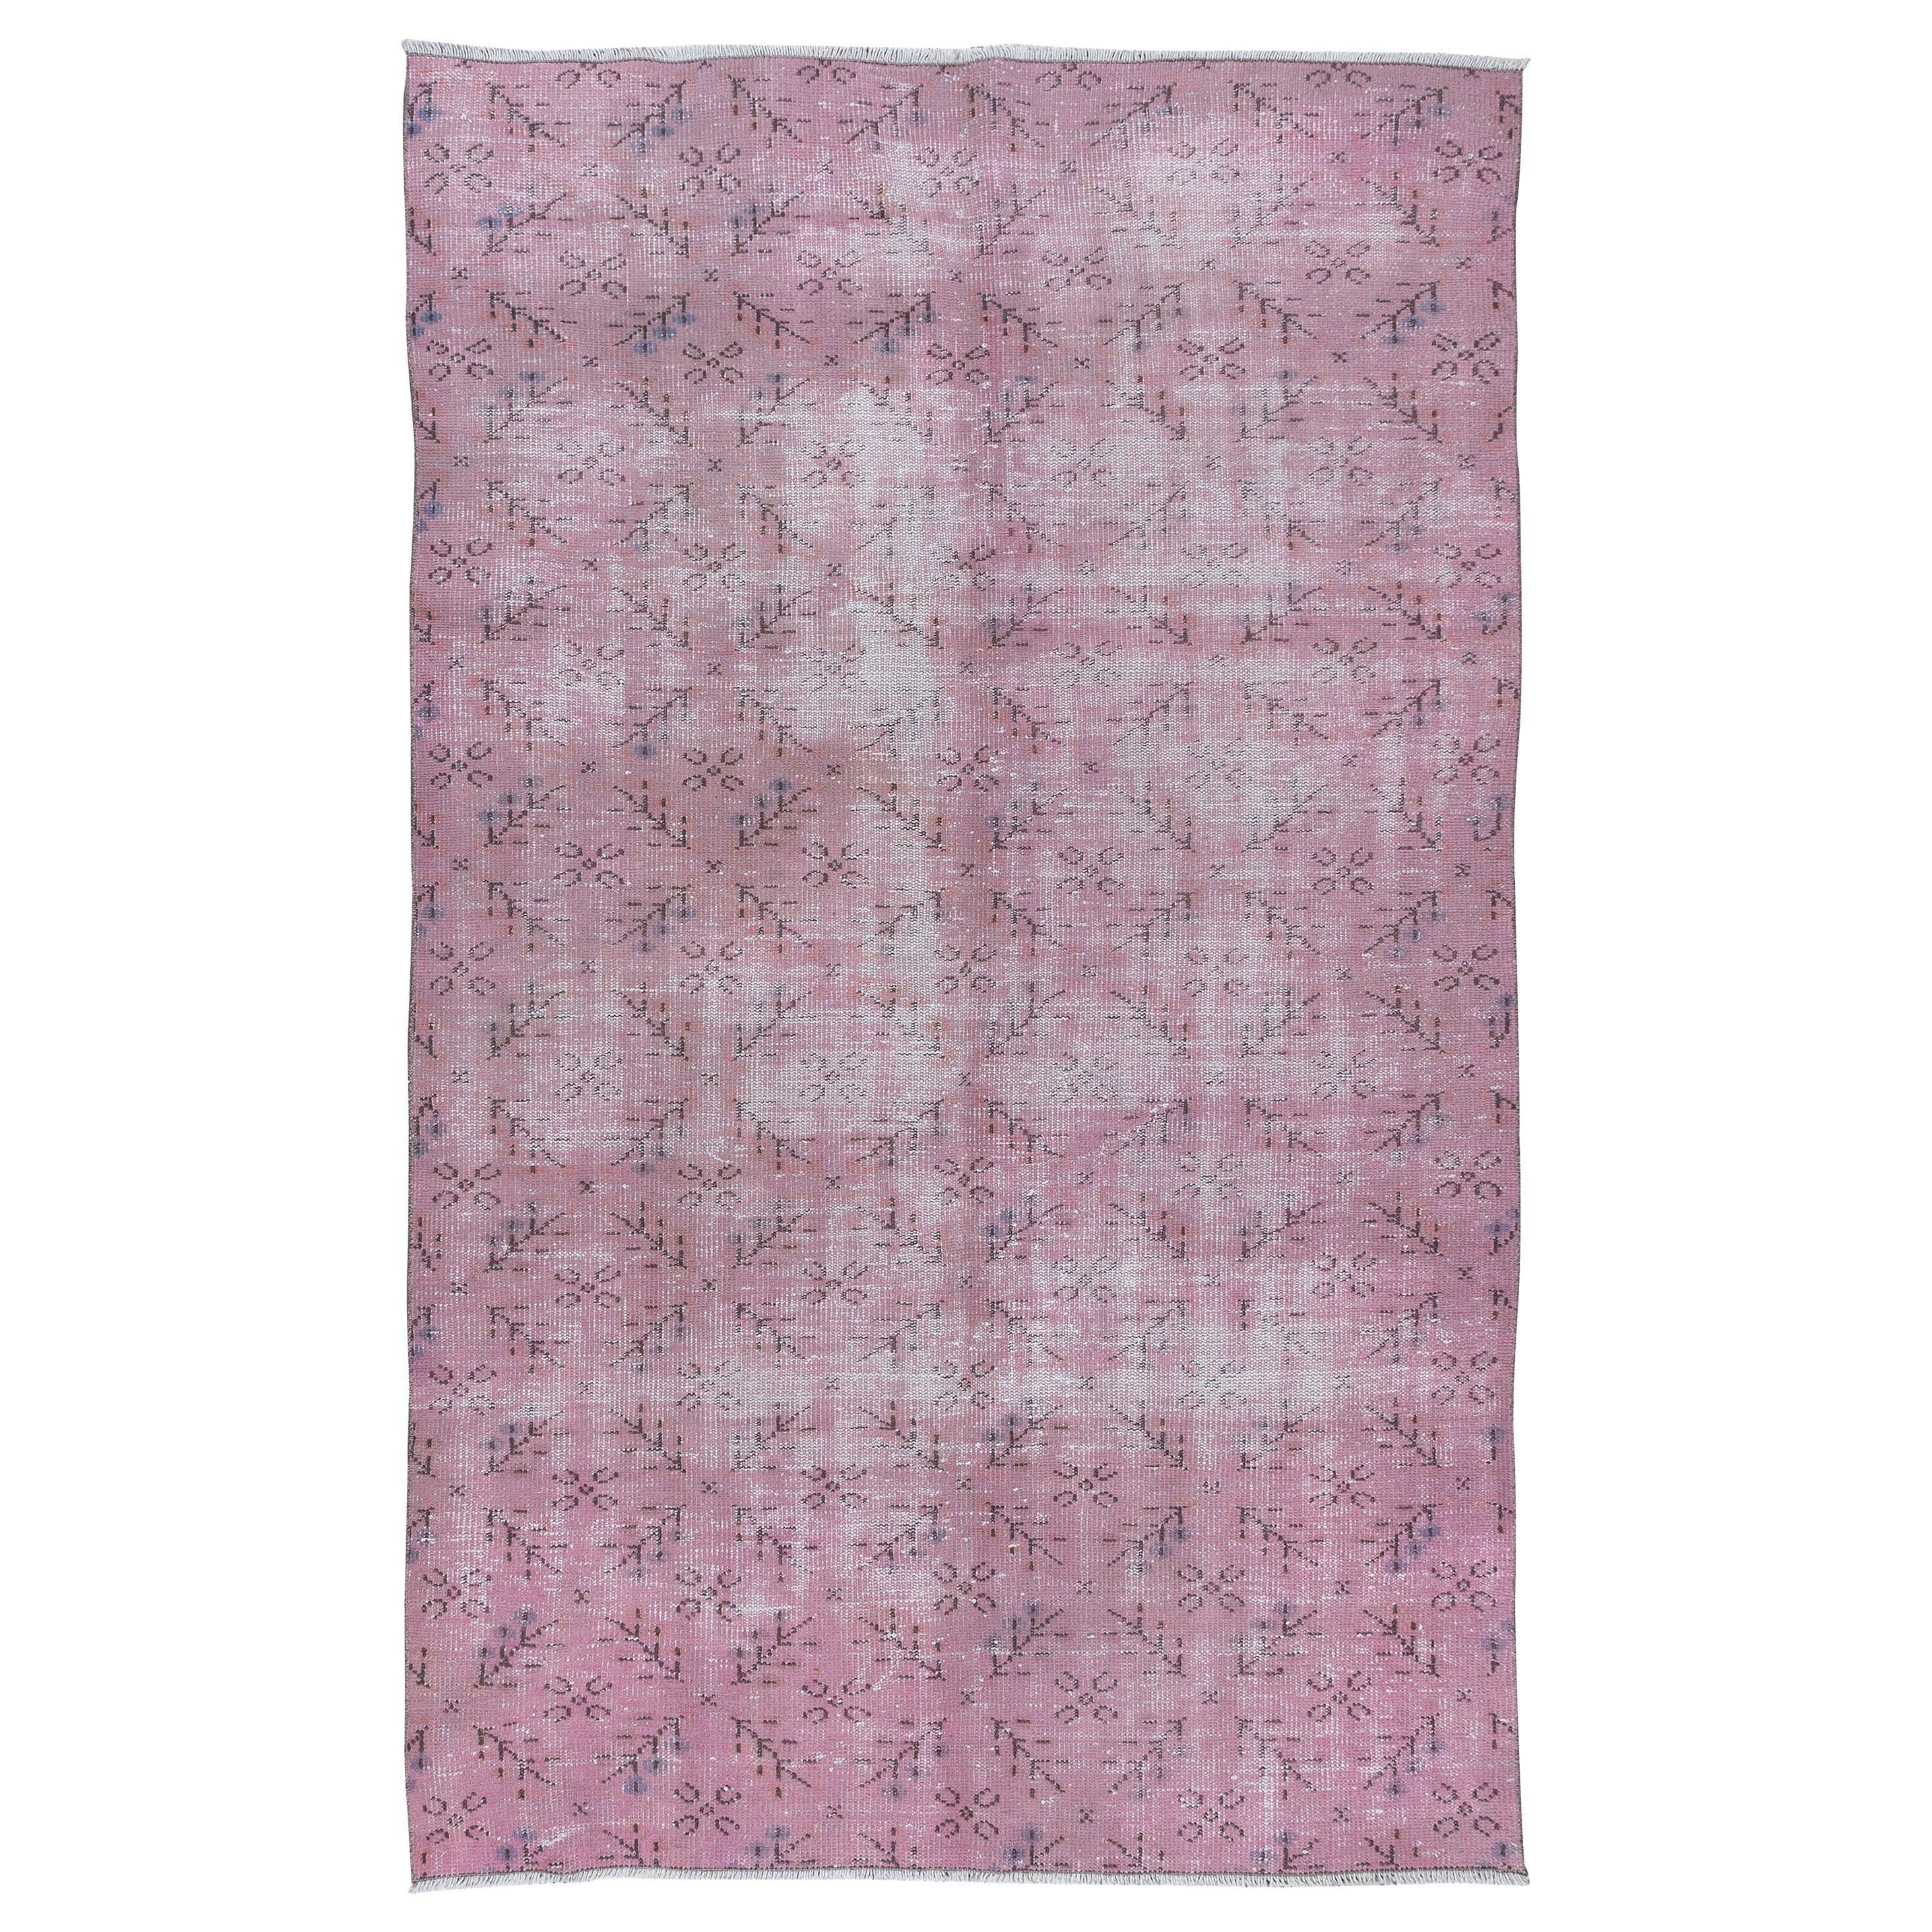 5.4x8.5 Ft Handmade Area Rug in Soft Pink, Modern Turkish Wool Carpet For Sale